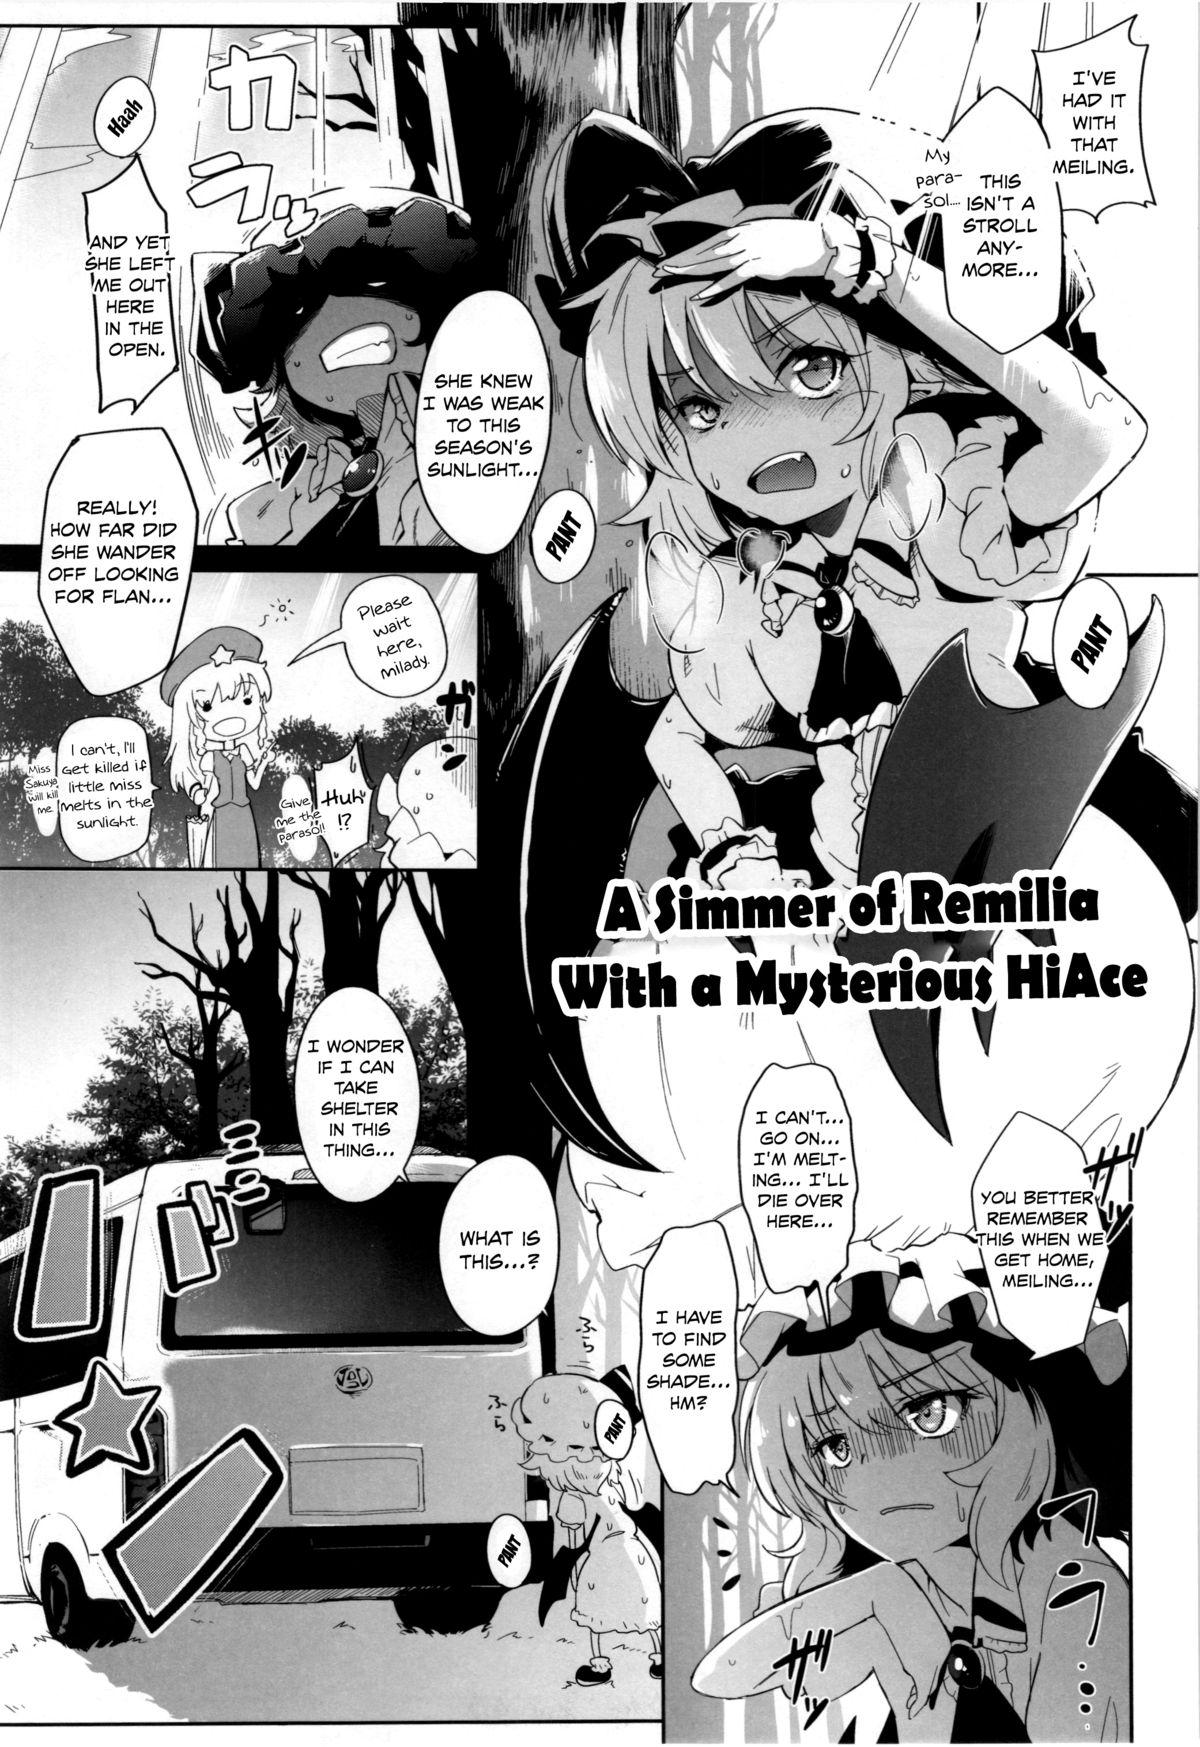 Fuck My Pussy Remilia to Fushigi no HiAce | A Simmer of Remilia With a Mysterious HiAce - Touhou project Cougar - Page 1